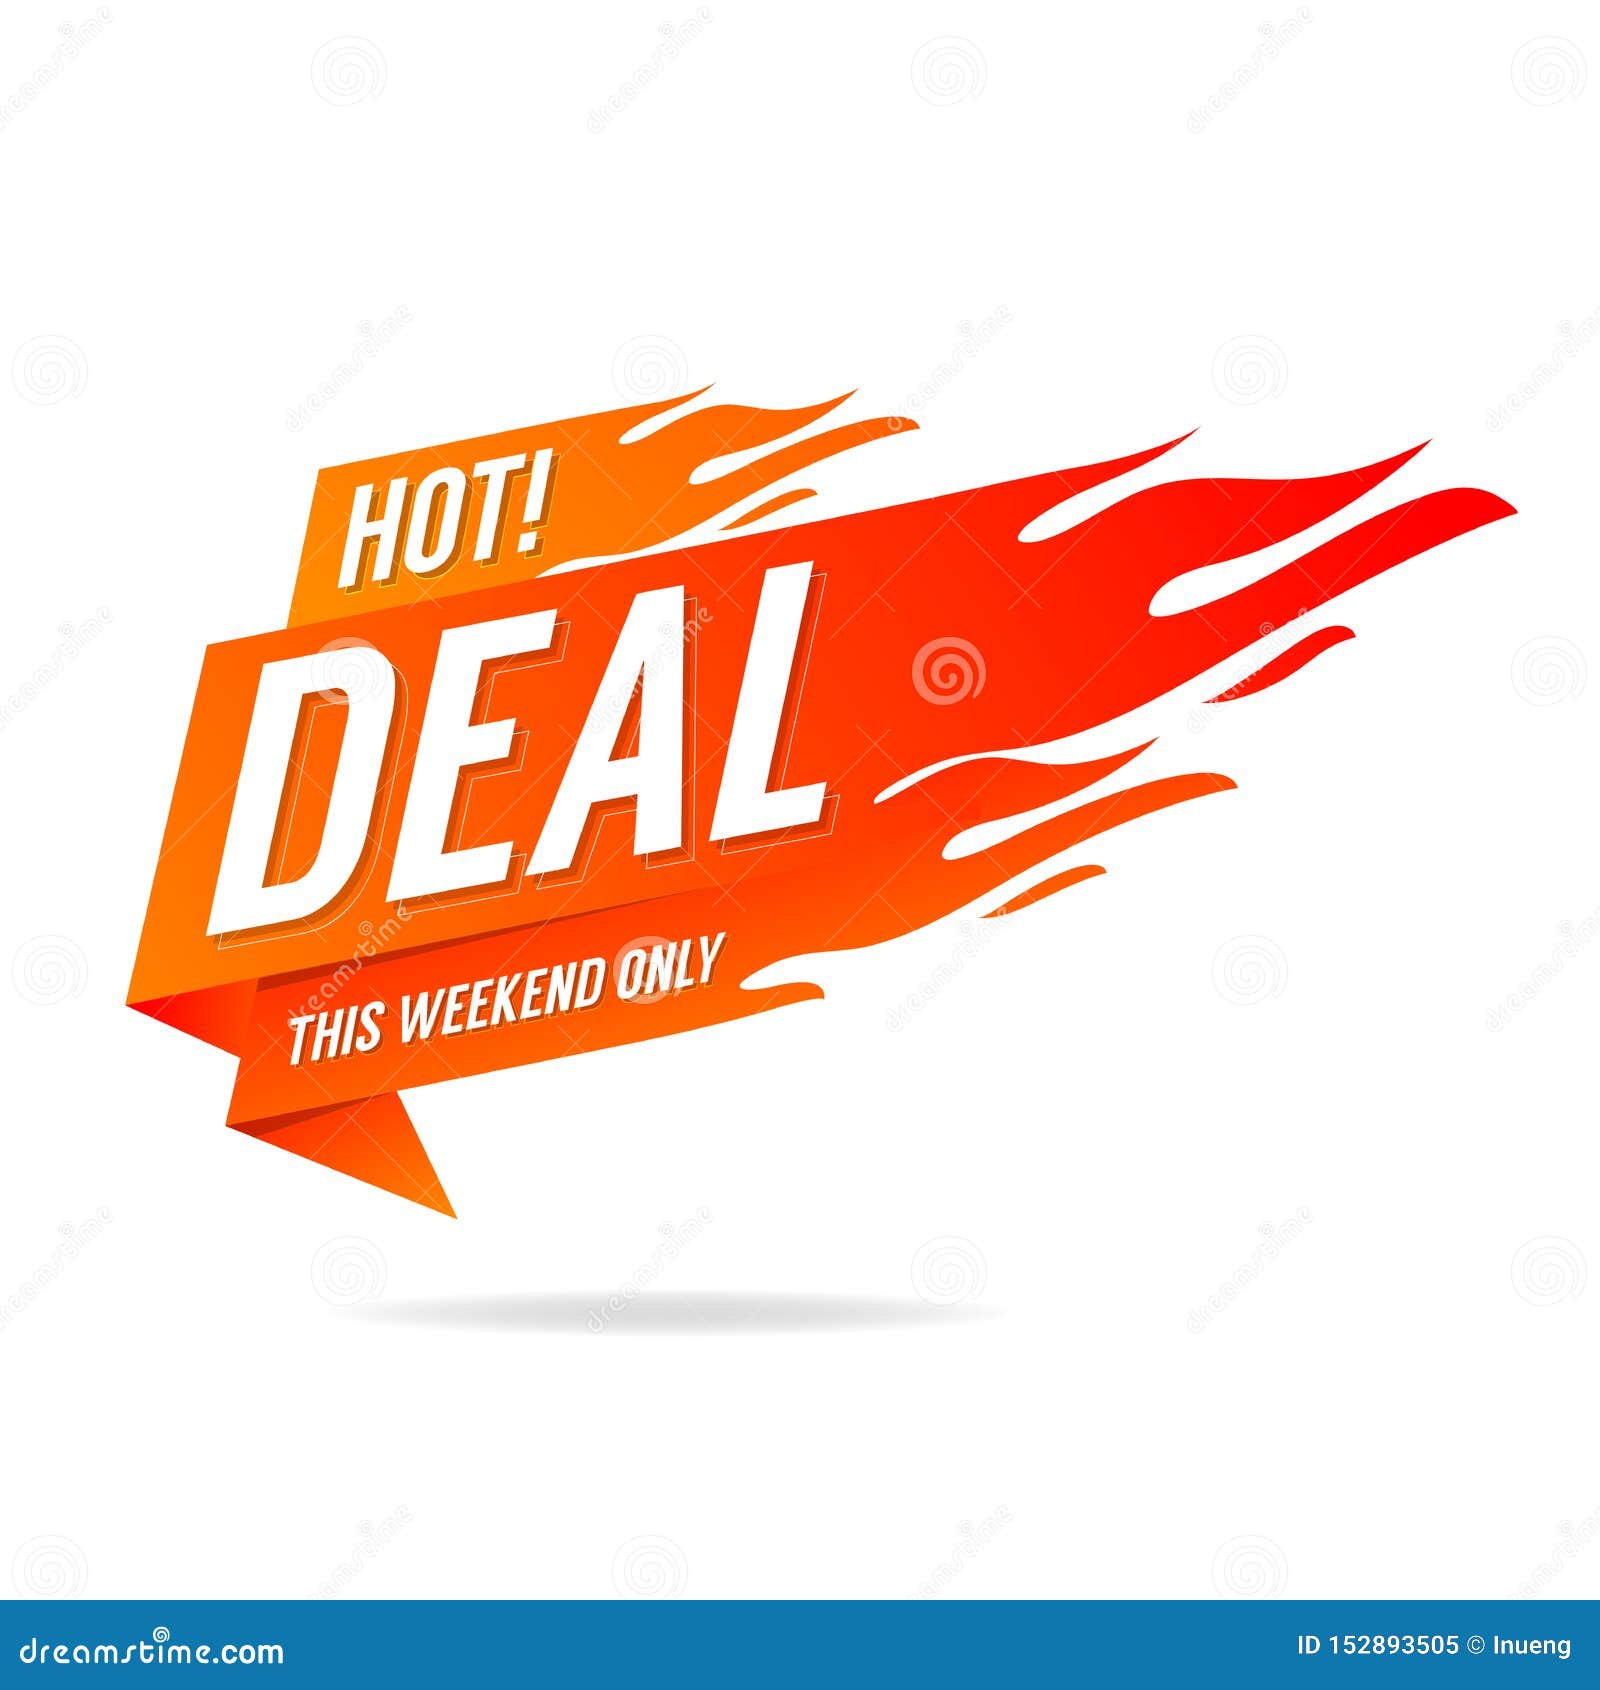 hot deal banner. this weekend only, big sale, discount.